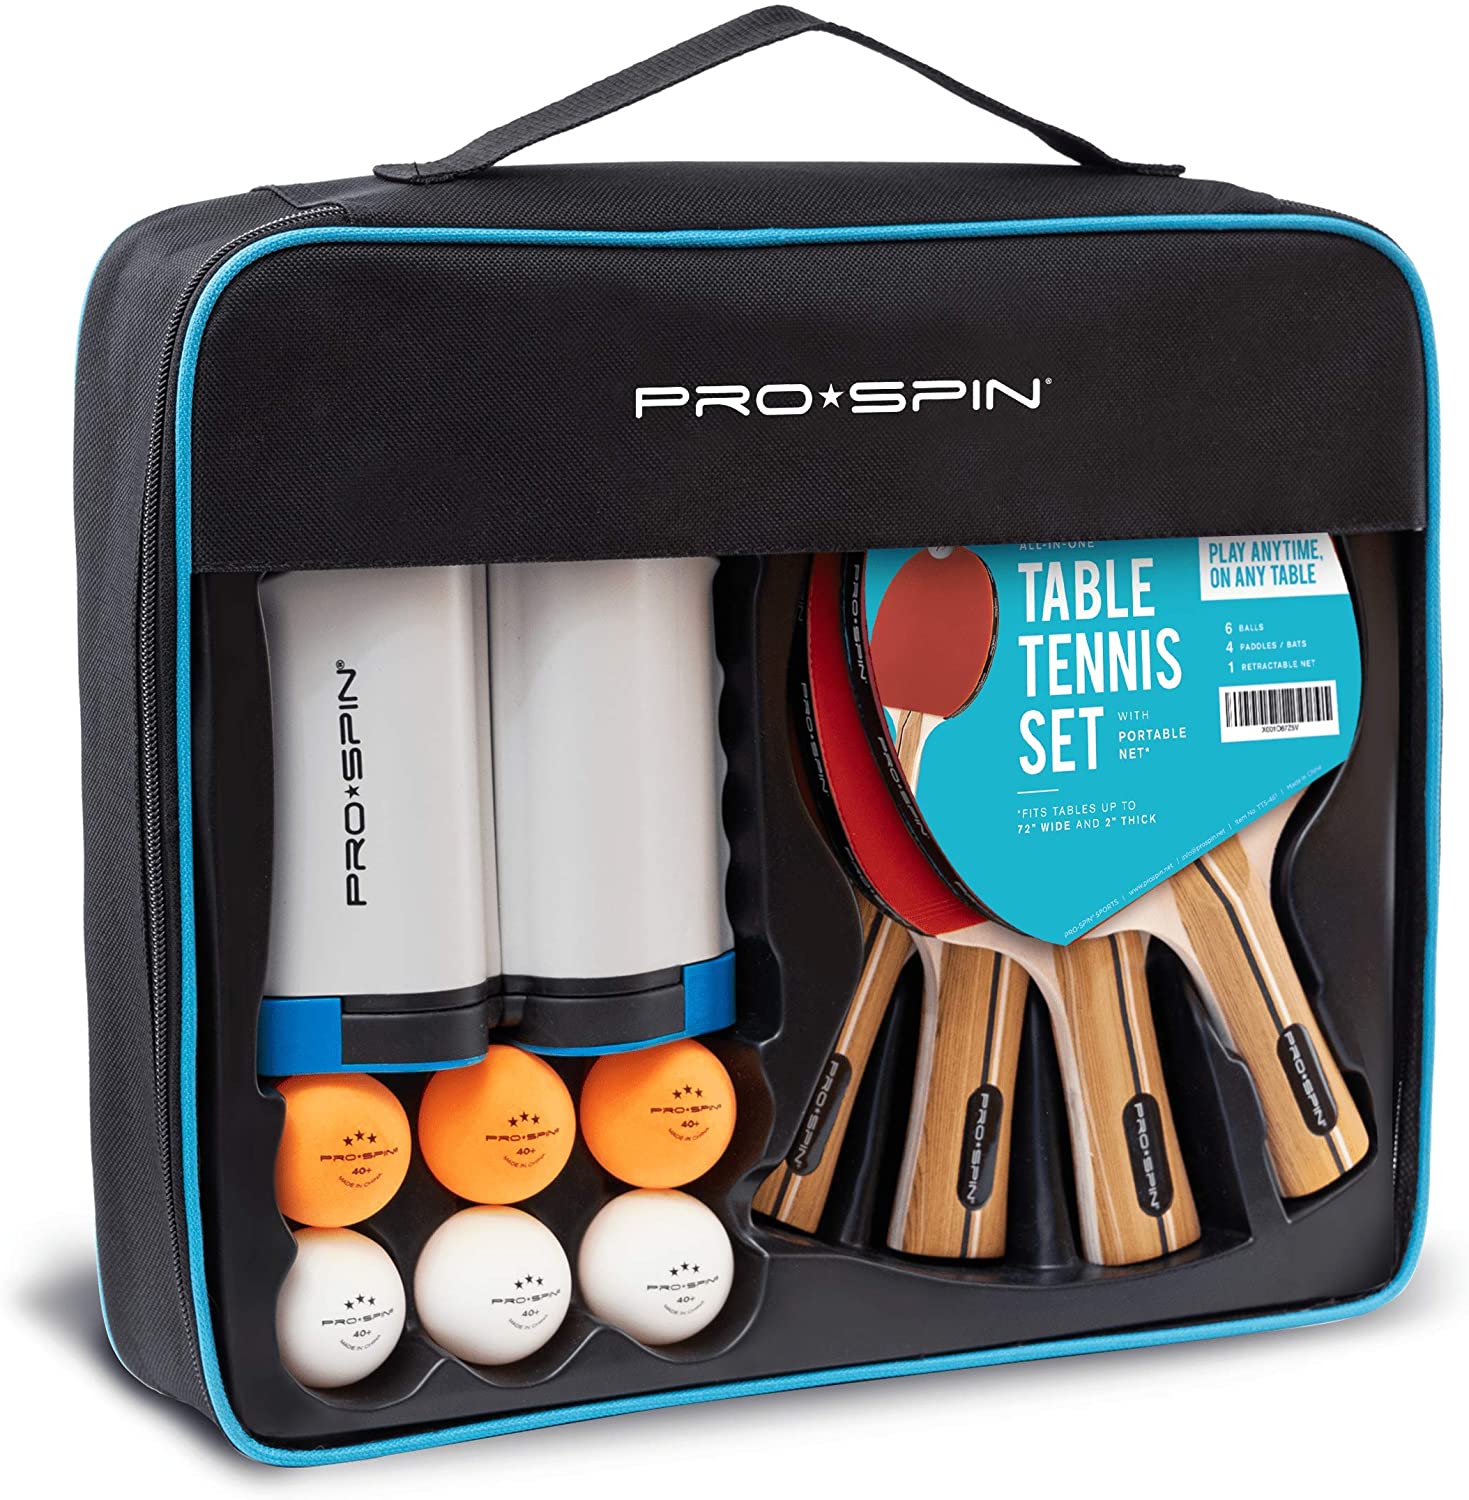 4-Player Kit with Ping Pong Net